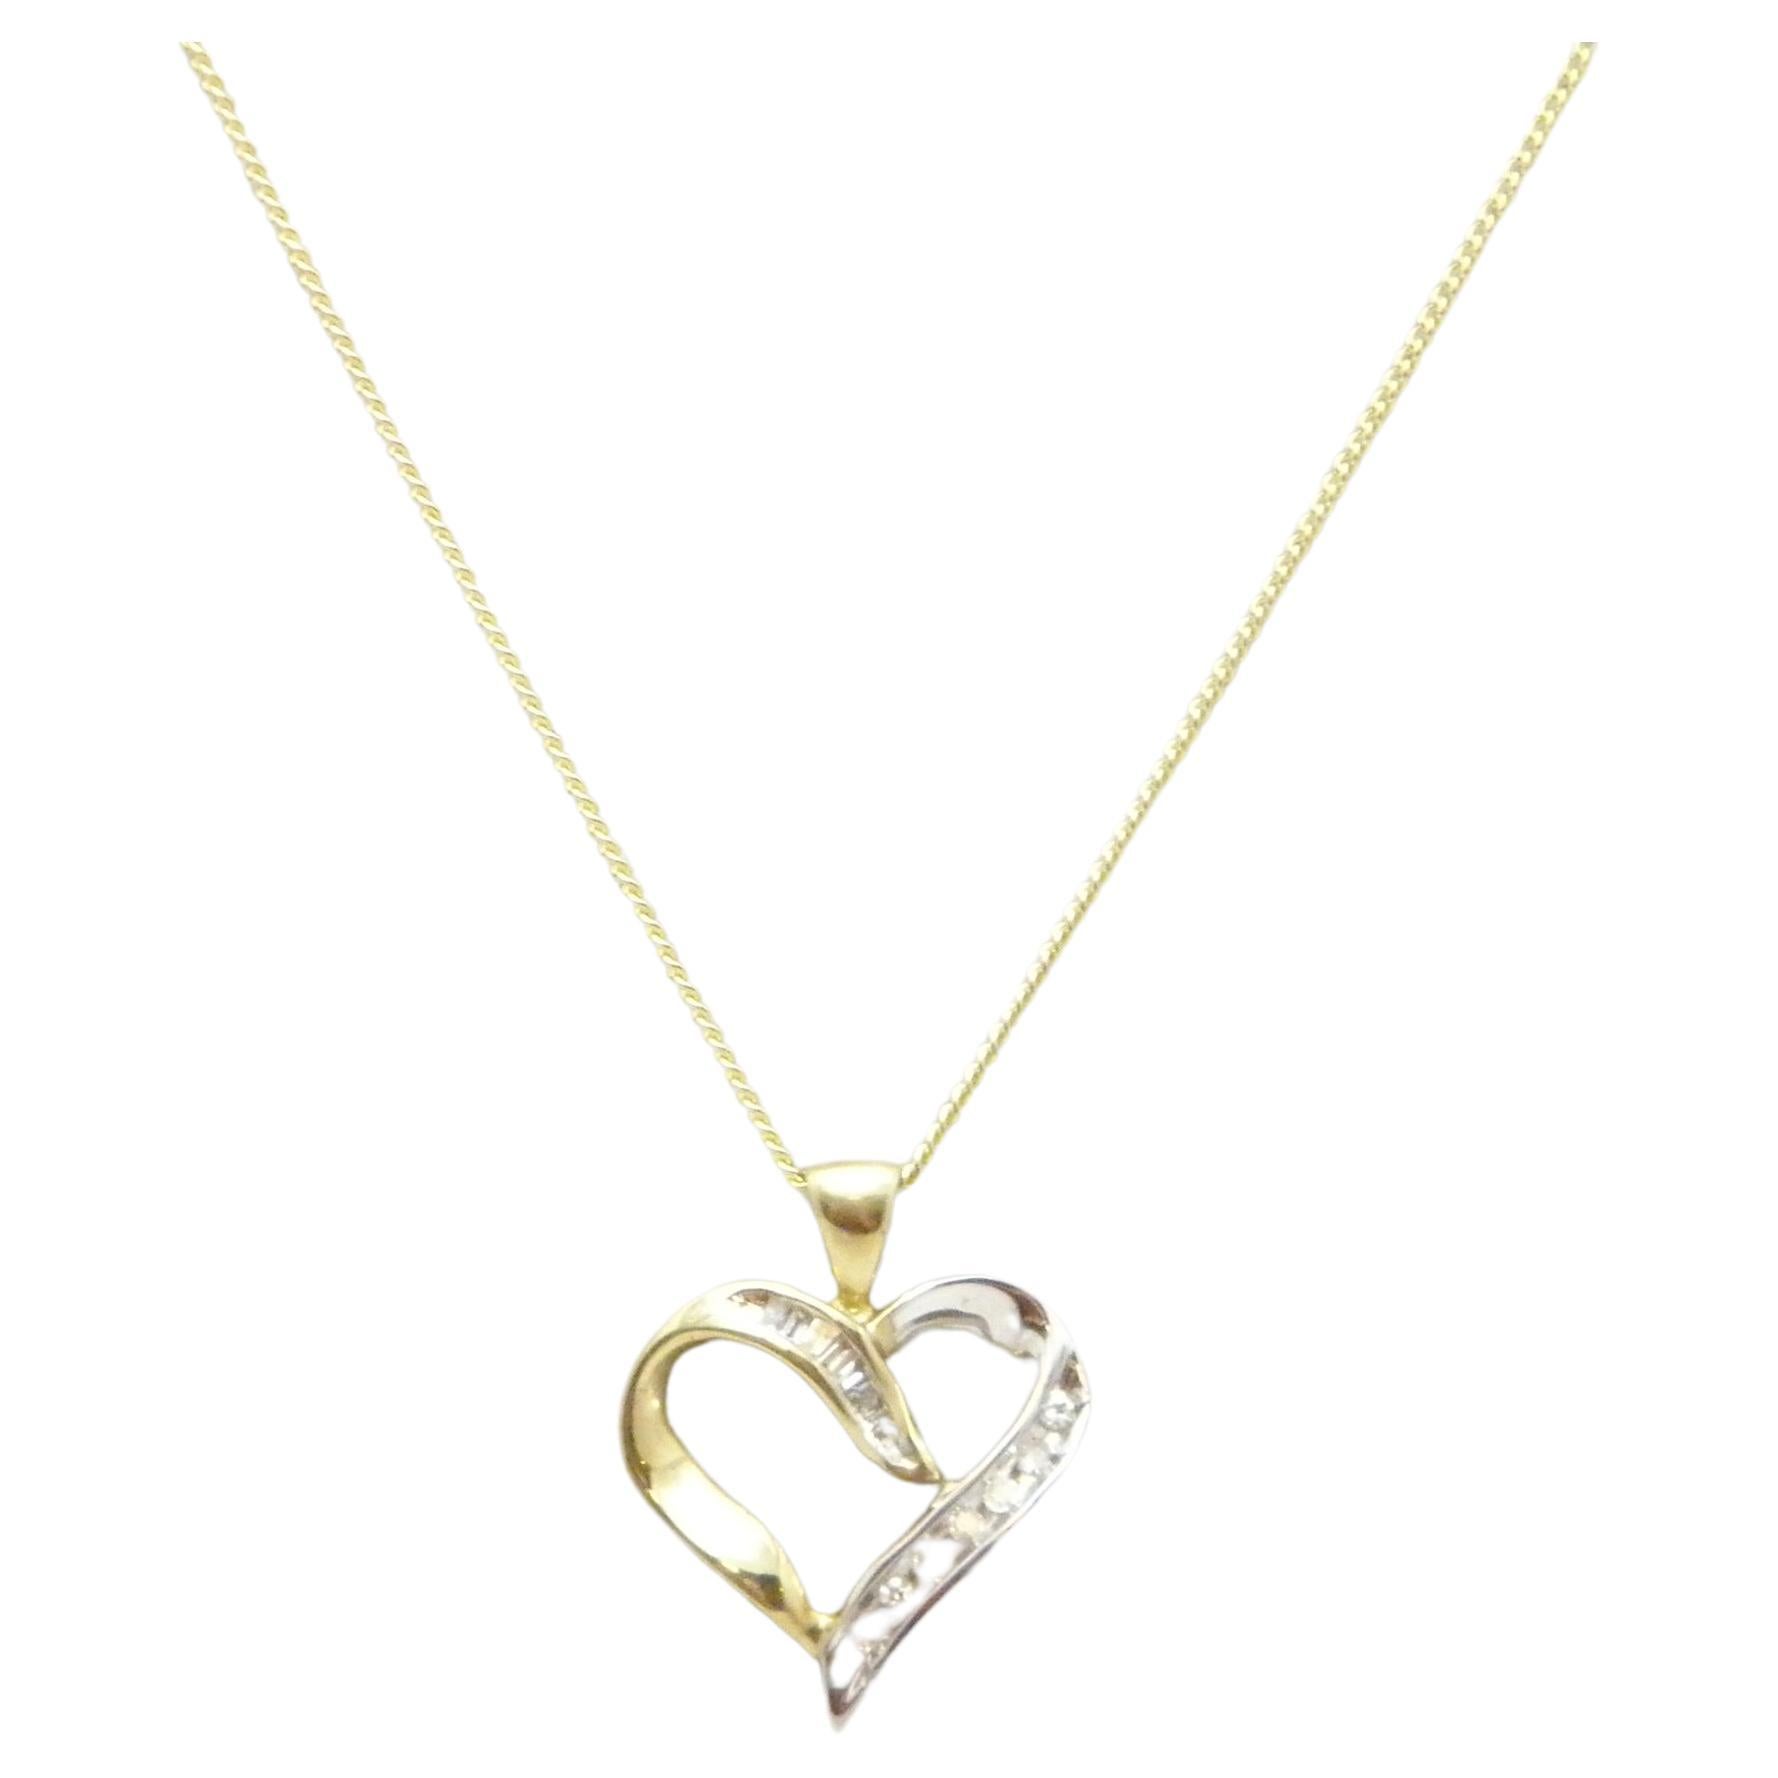 Vintage 9ct Gold 0.25 Cttw Diamond Heart Pendant Necklace Curb Chain 375 20 Inch For Sale